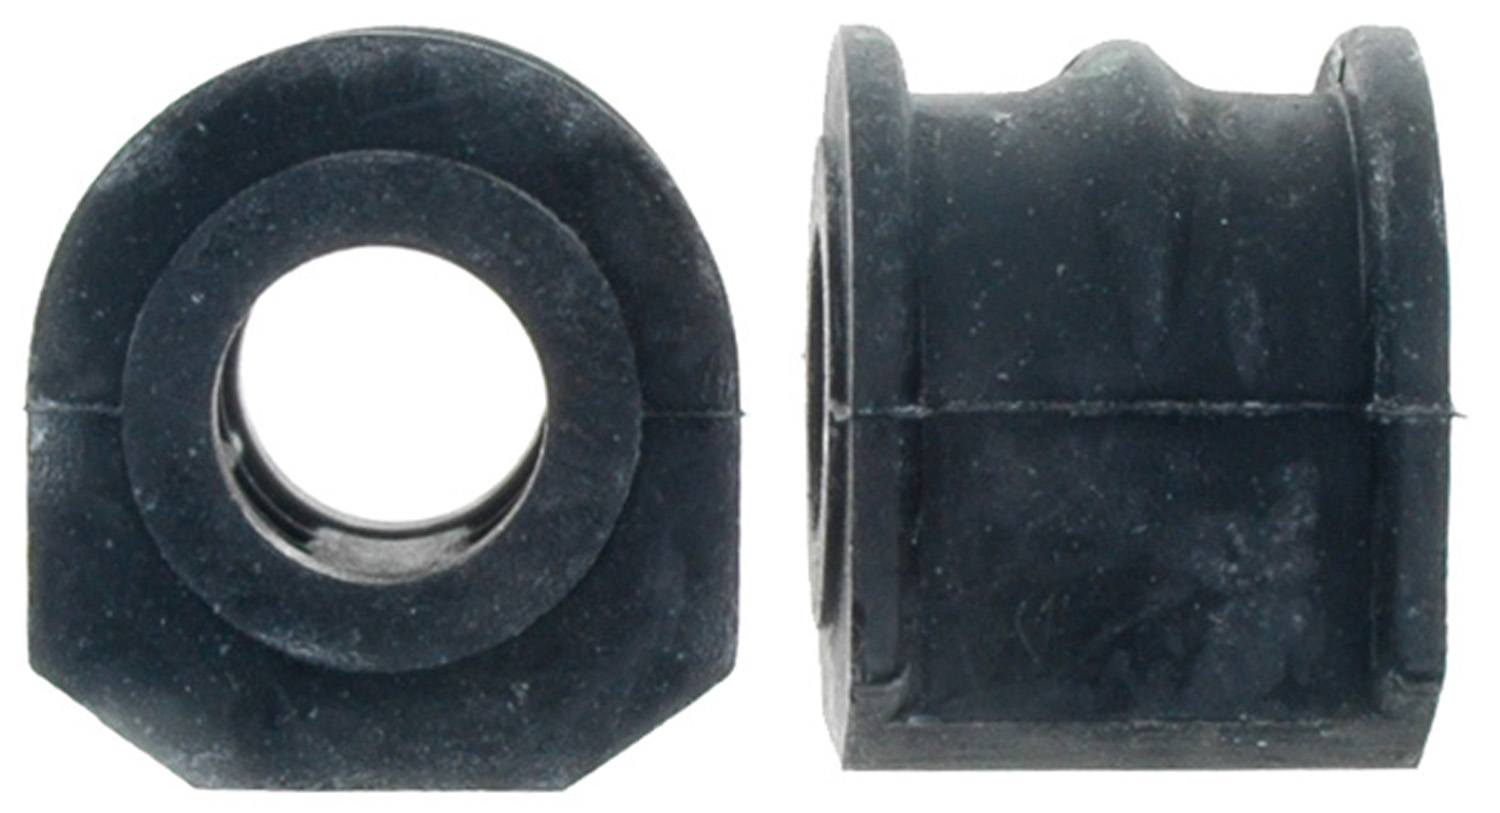 Suspension Stabilizer Bar Bushing Kit Front ACDelco fits 99-04 Ford Mustang